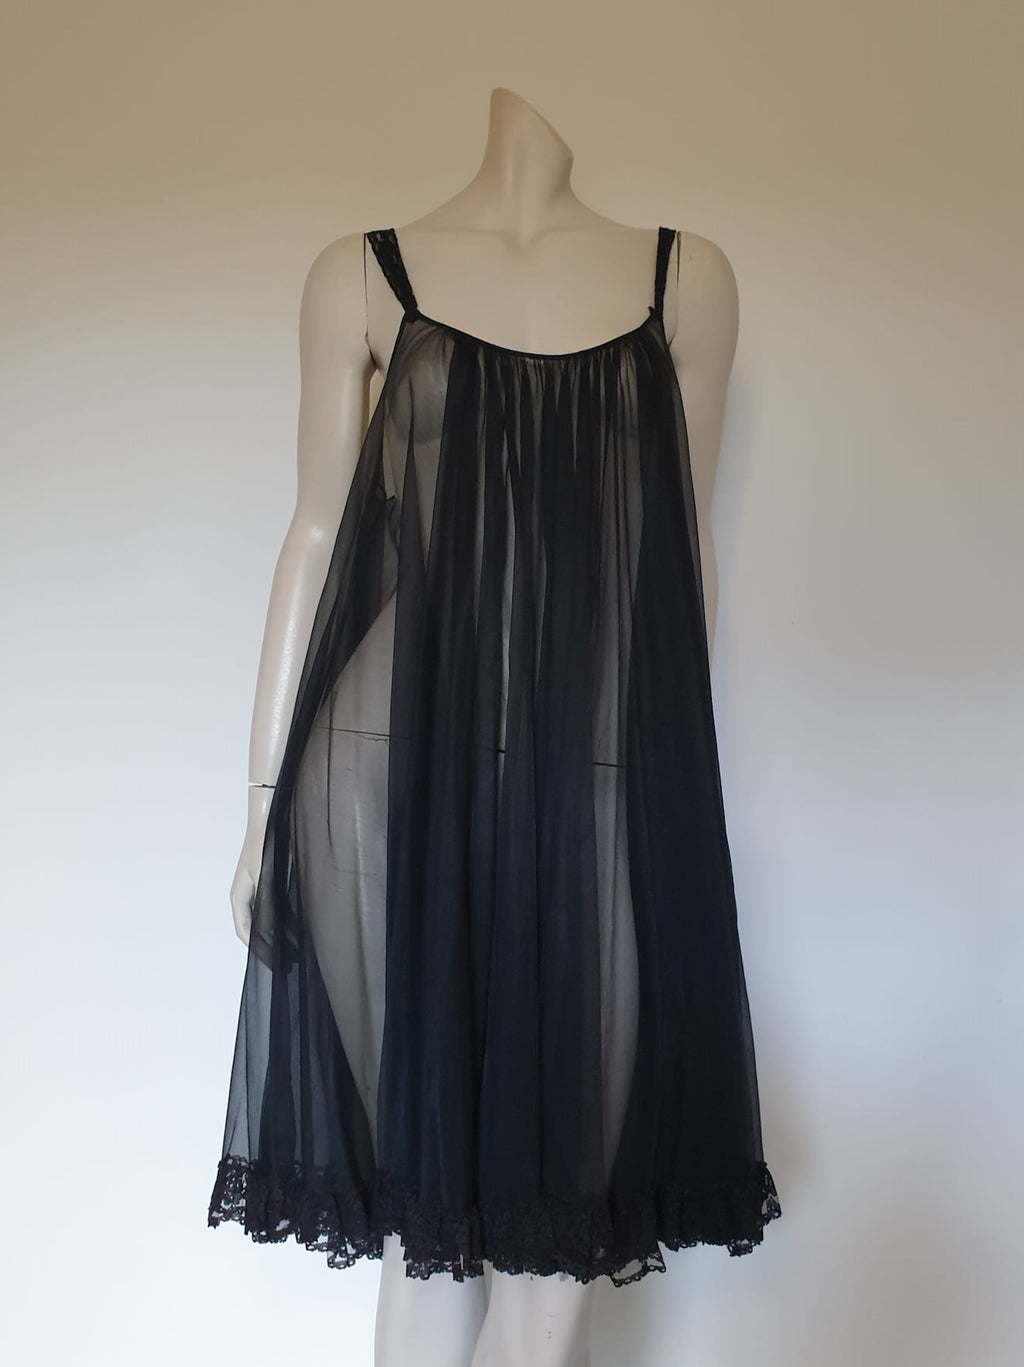 1960s short sheer black nightgown by Tempo